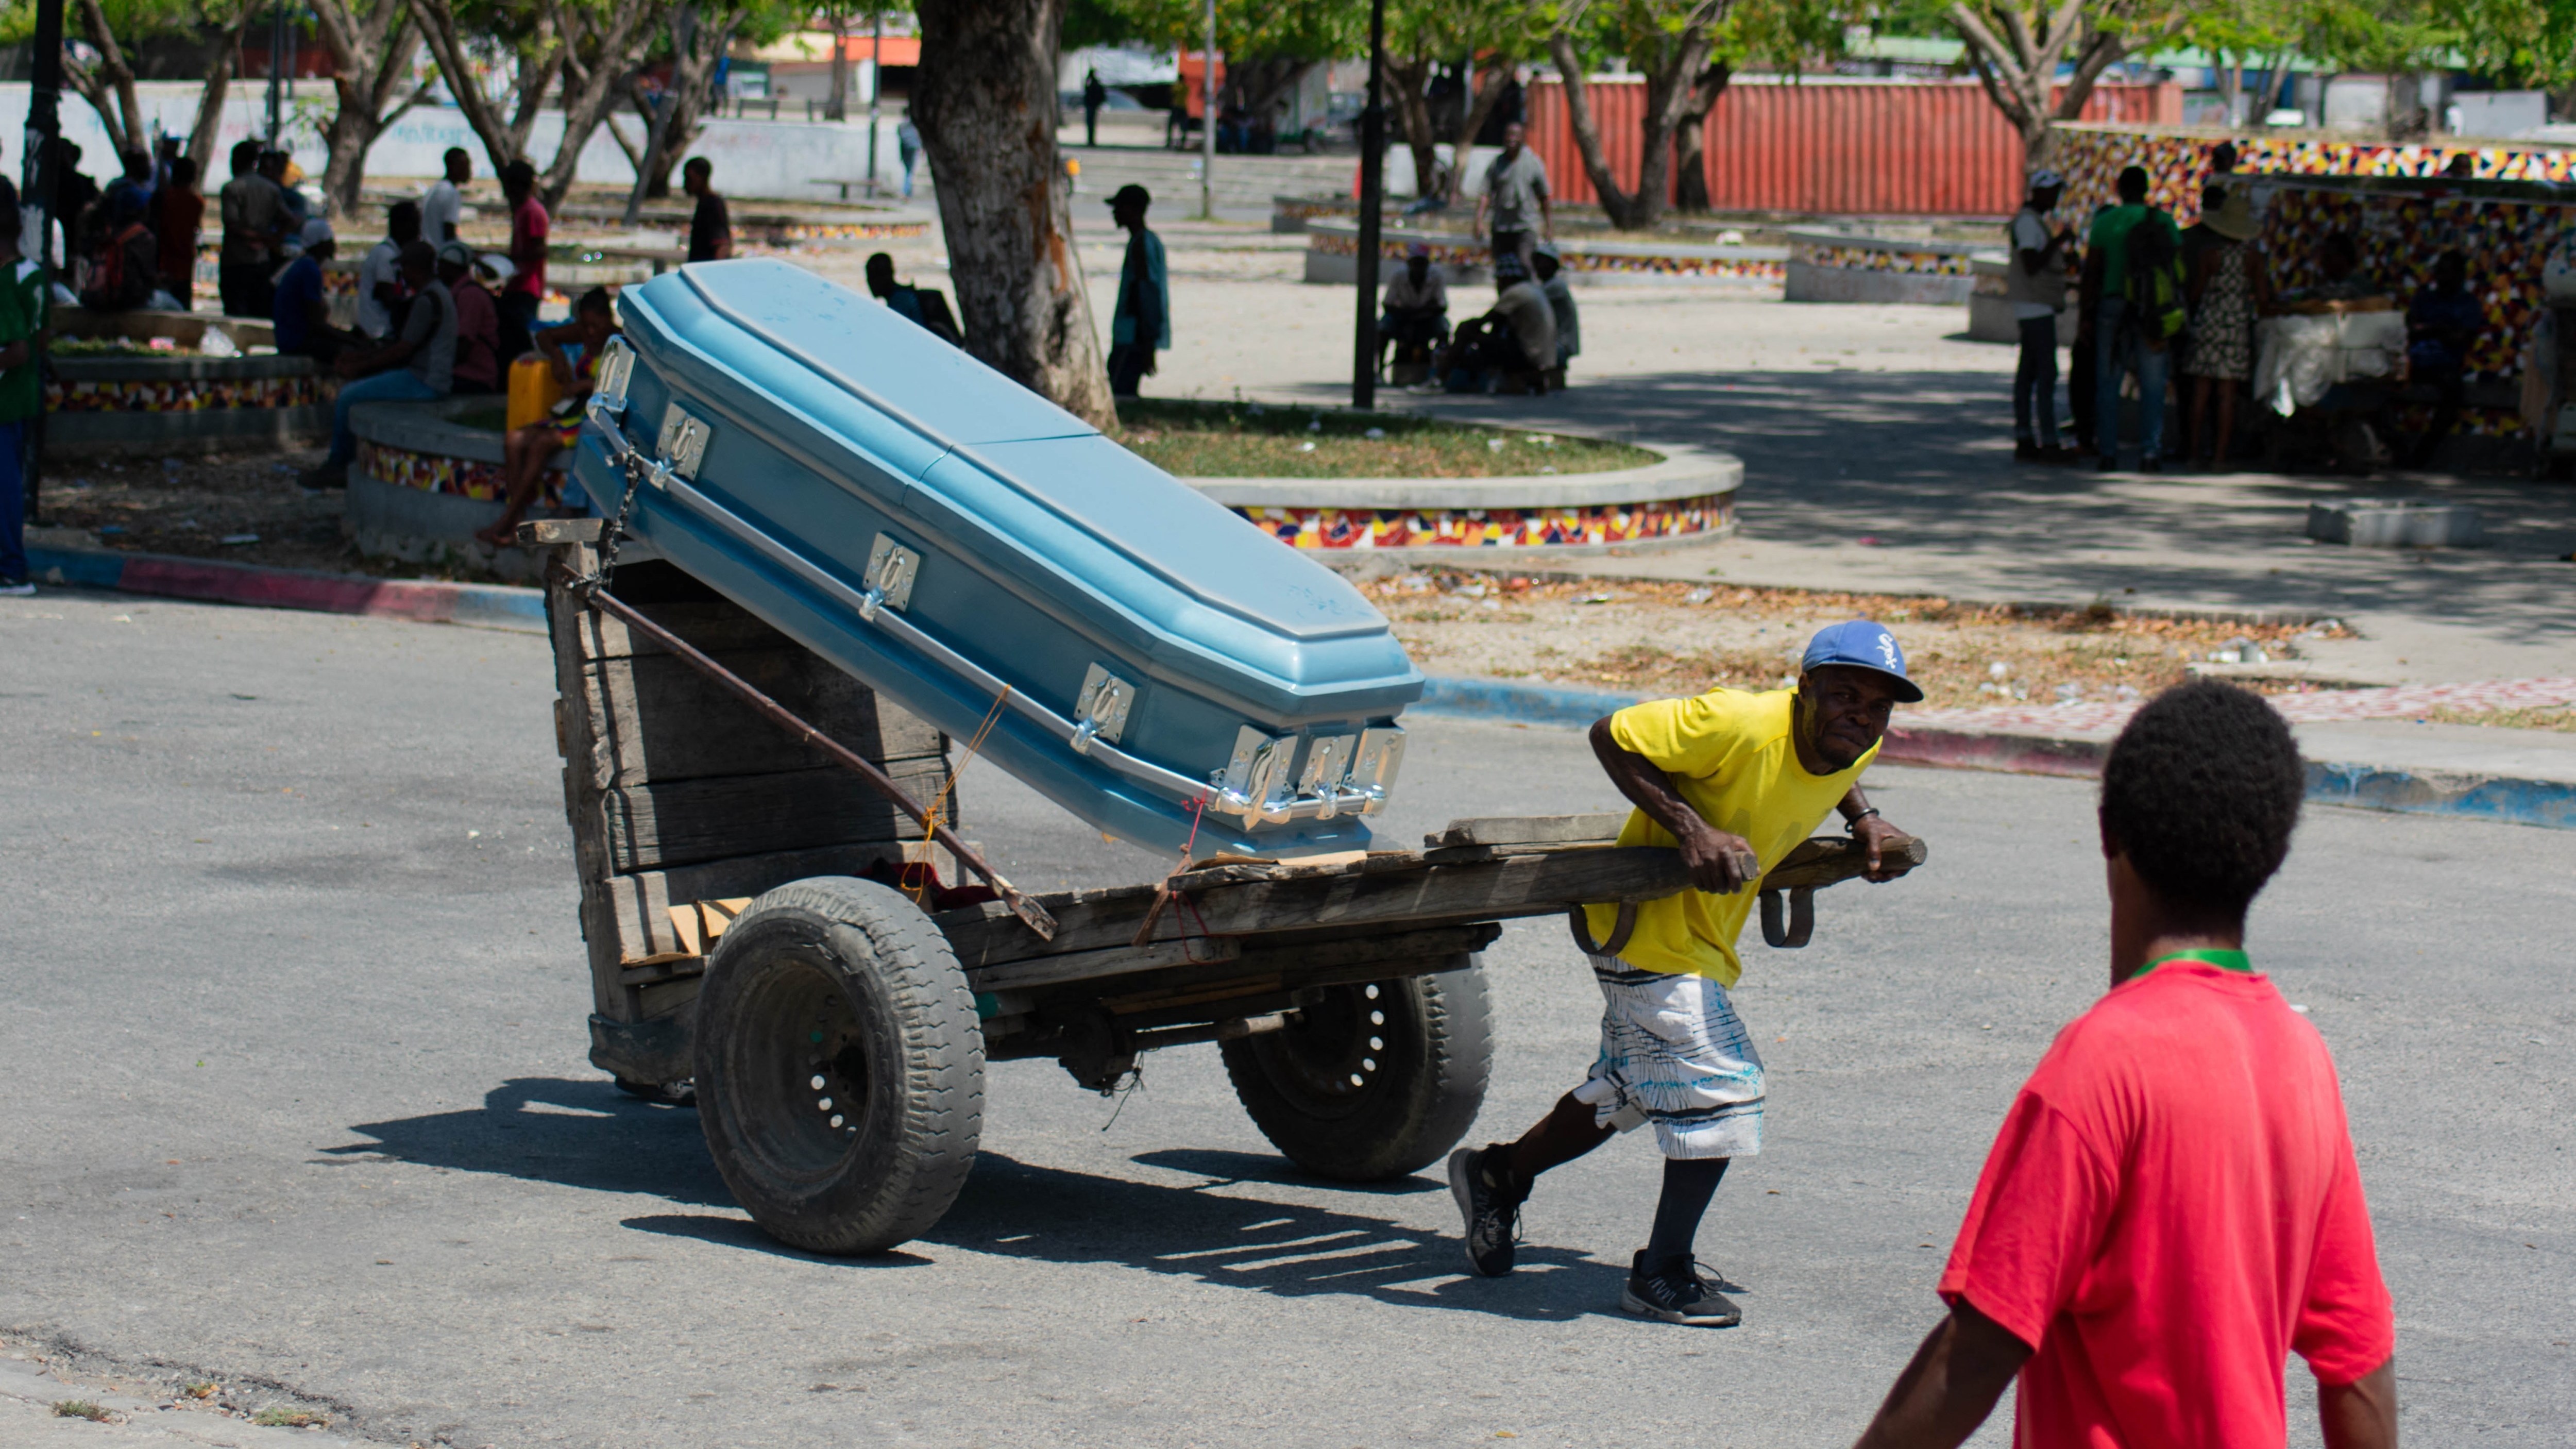 A coffin is pulled through Port-au-Prince, the capital, where violence continues to hobble society and the state